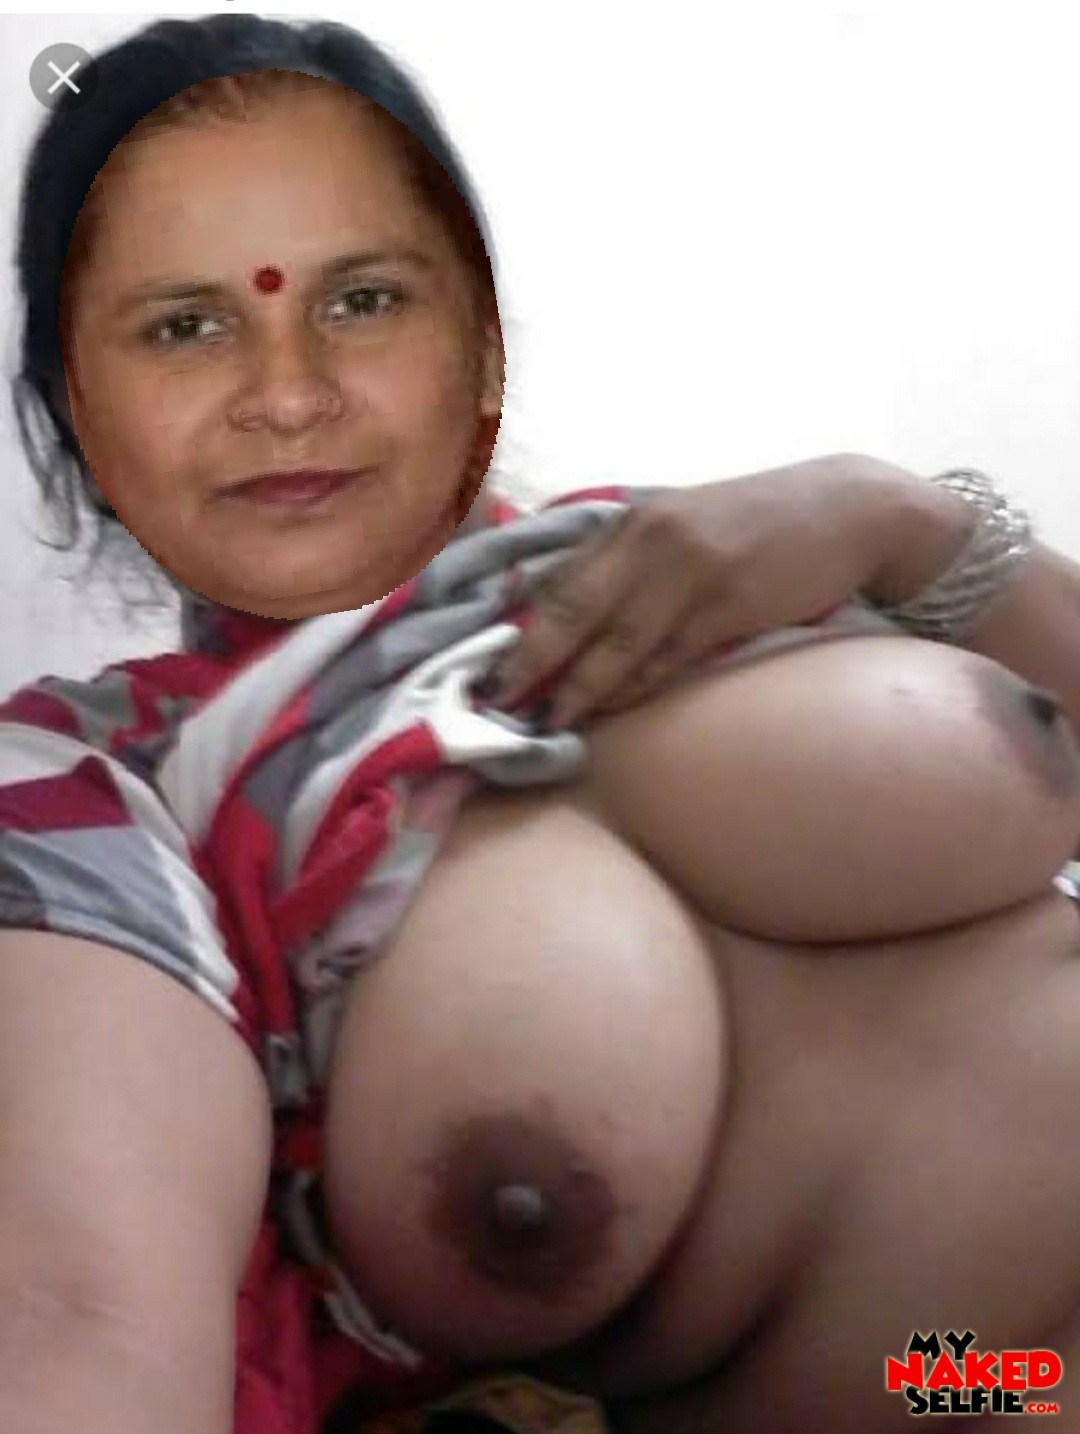 Old Huge Indian Tits - Huge Old Indian Breasts Porn (51 photos) - motherless porn pics